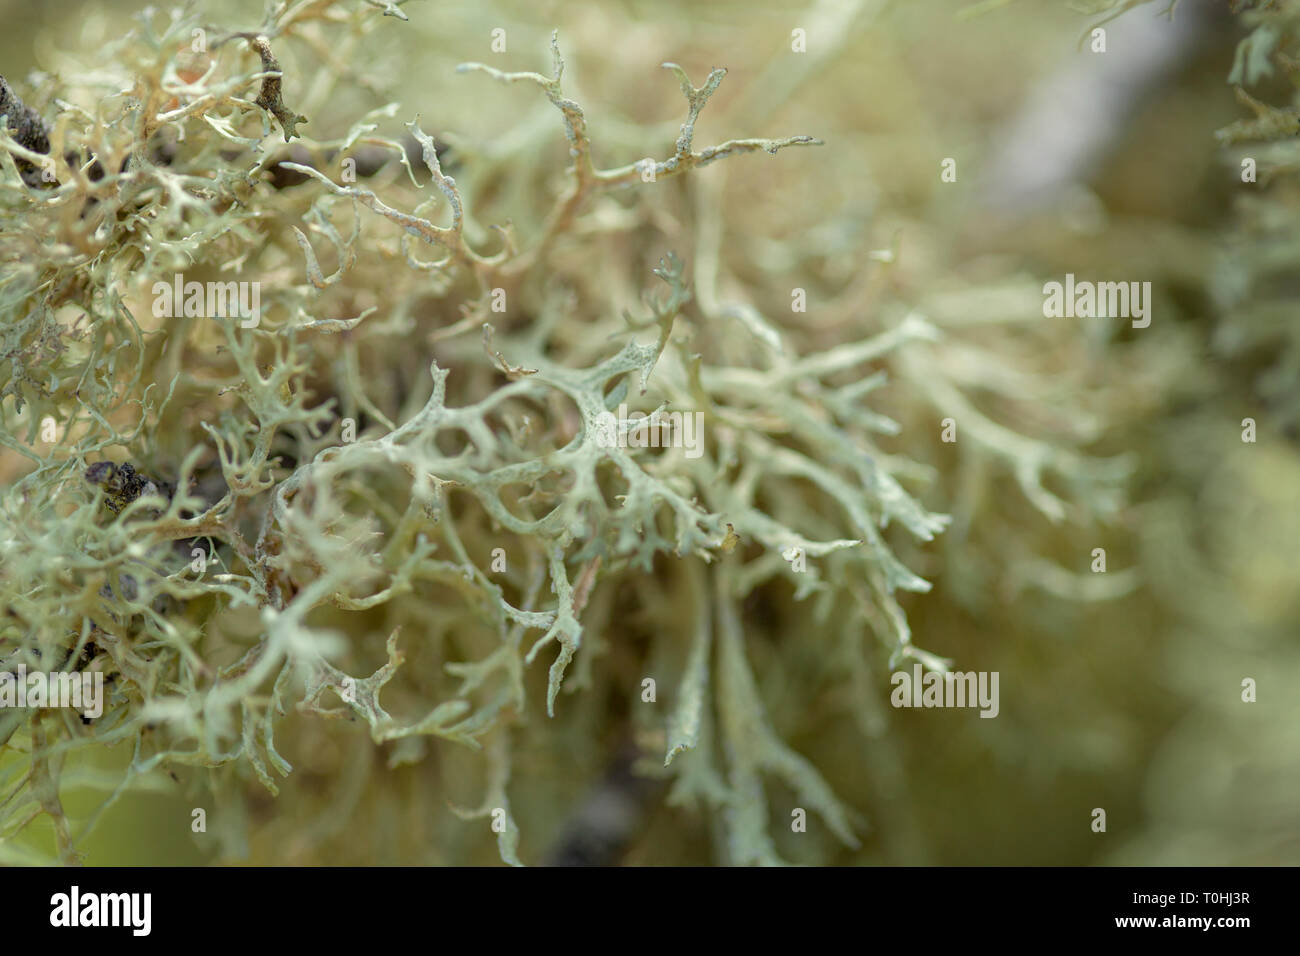 flora of Gran Canaria - lichen, bioindicator of air purity, covers old branches Stock Photo